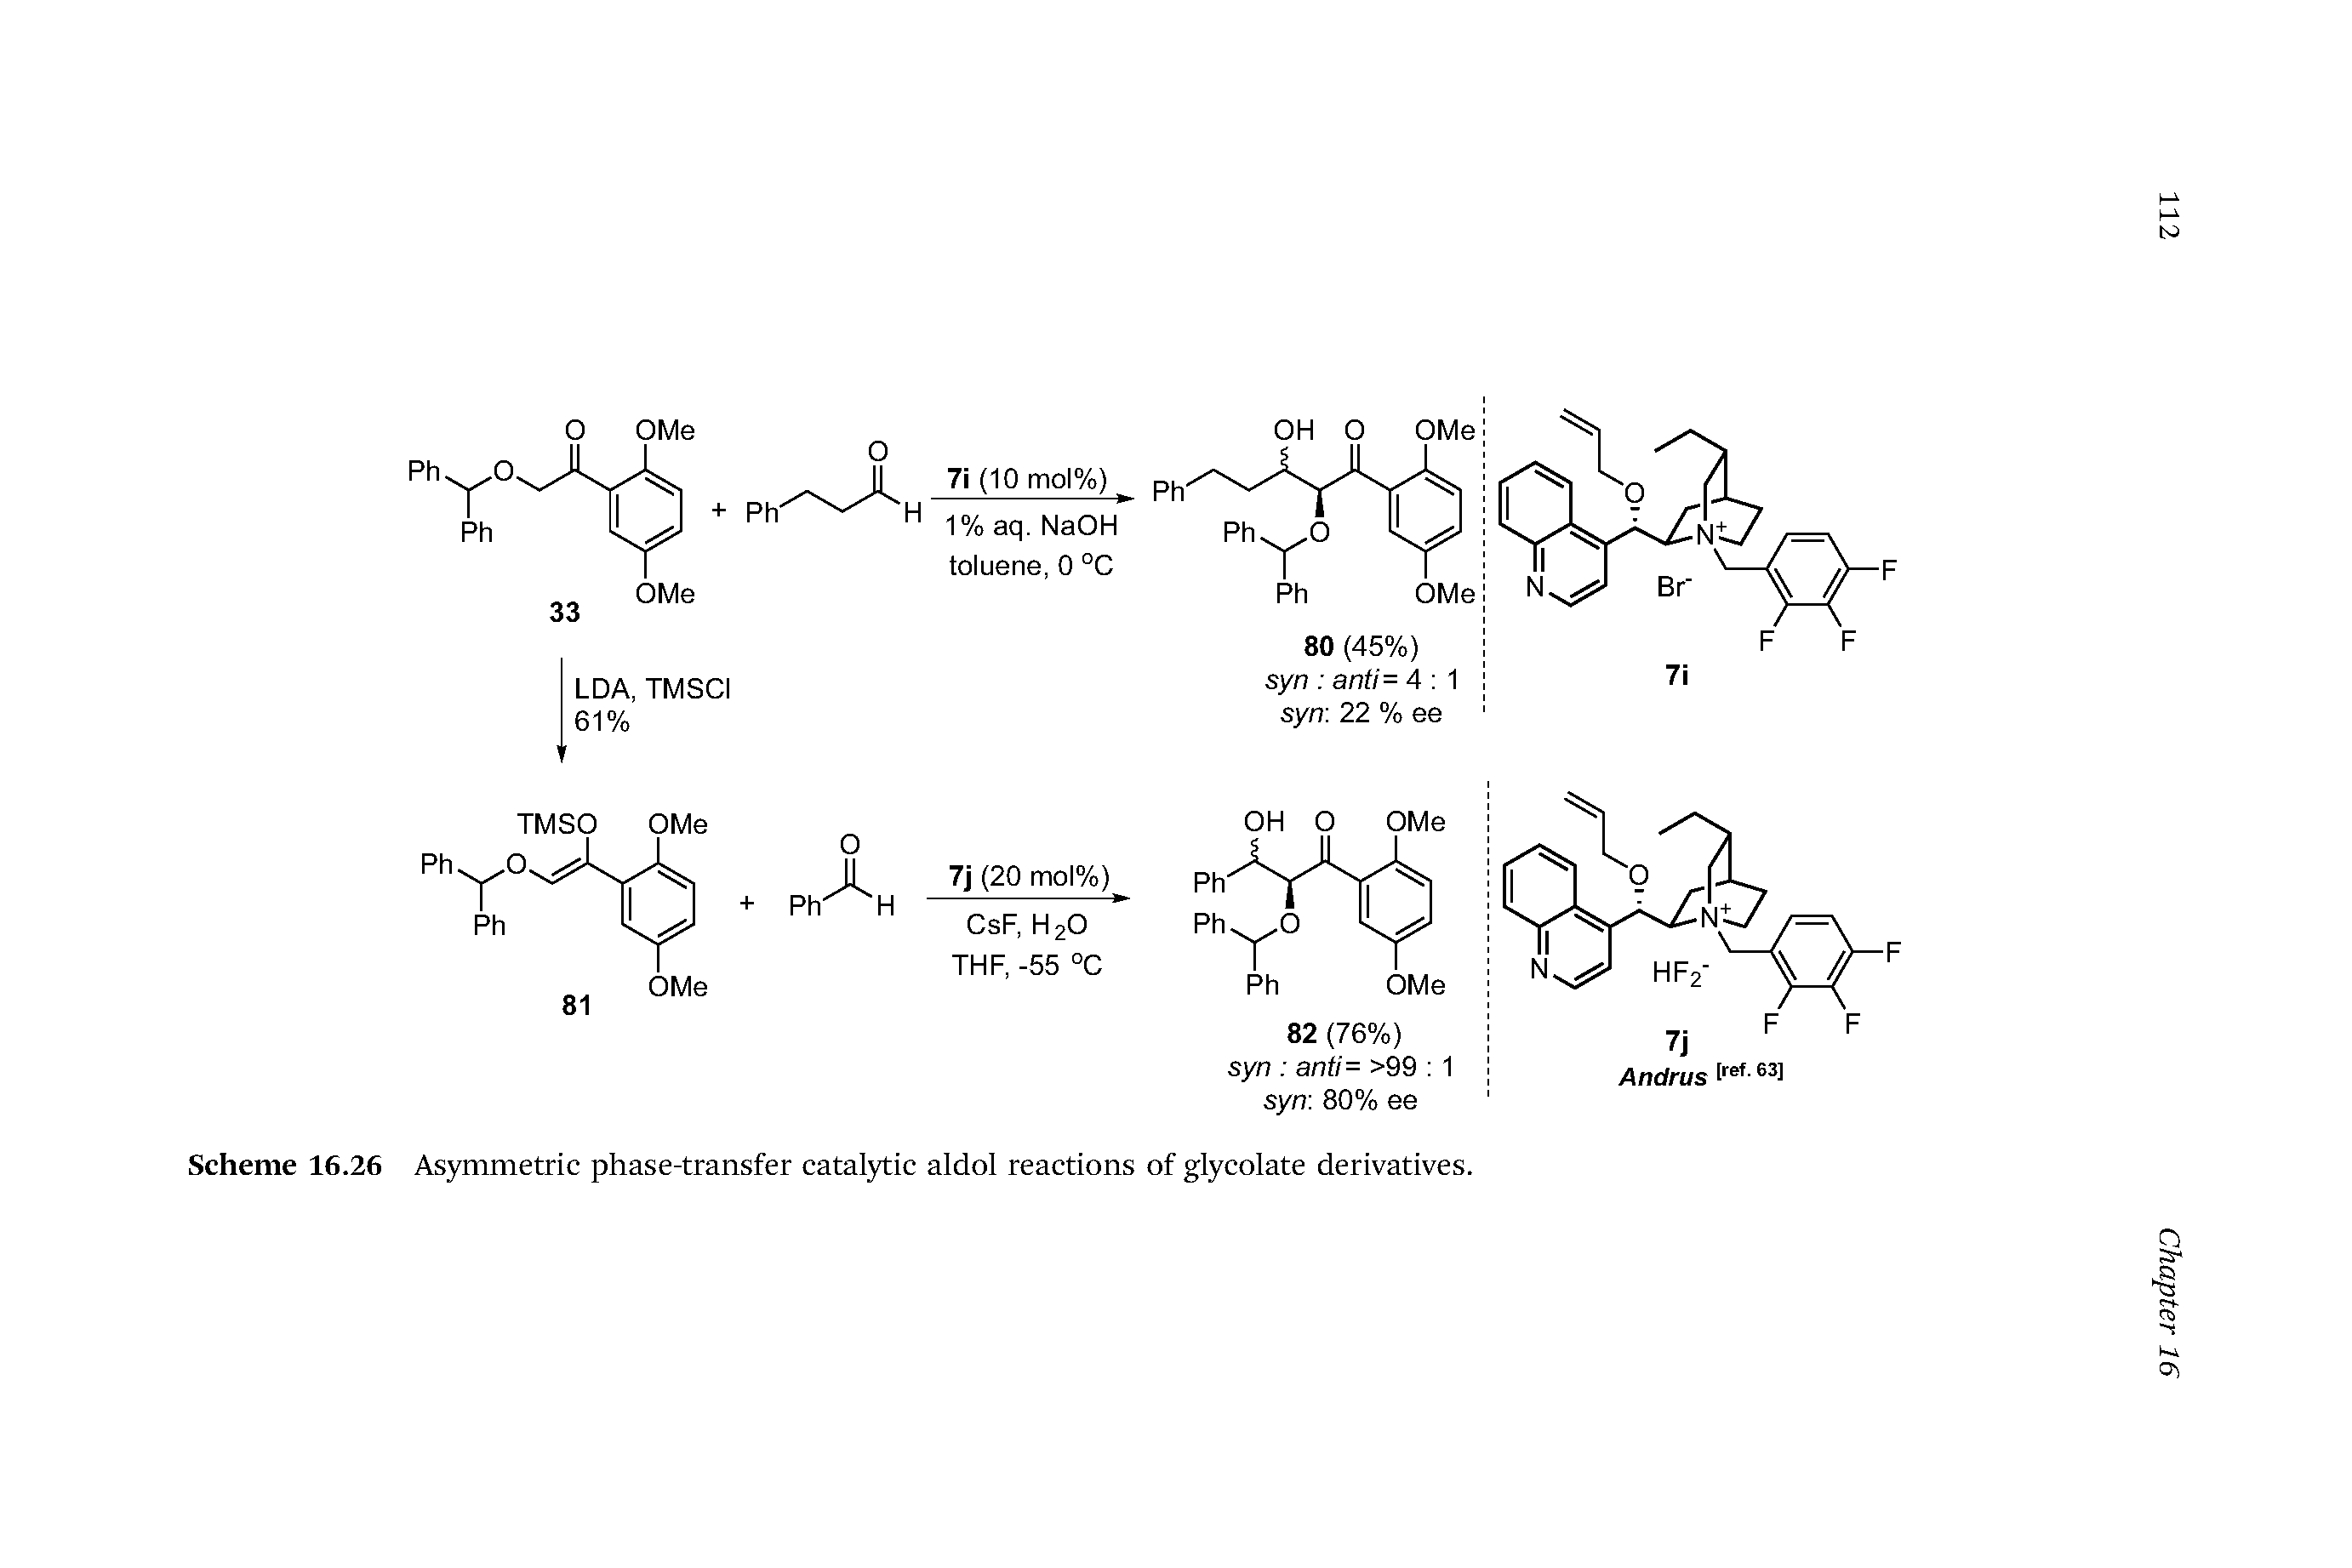 Scheme 16.26 Asymmetric phase-transfer catalytic aldol reactions of glycolate derivatives.